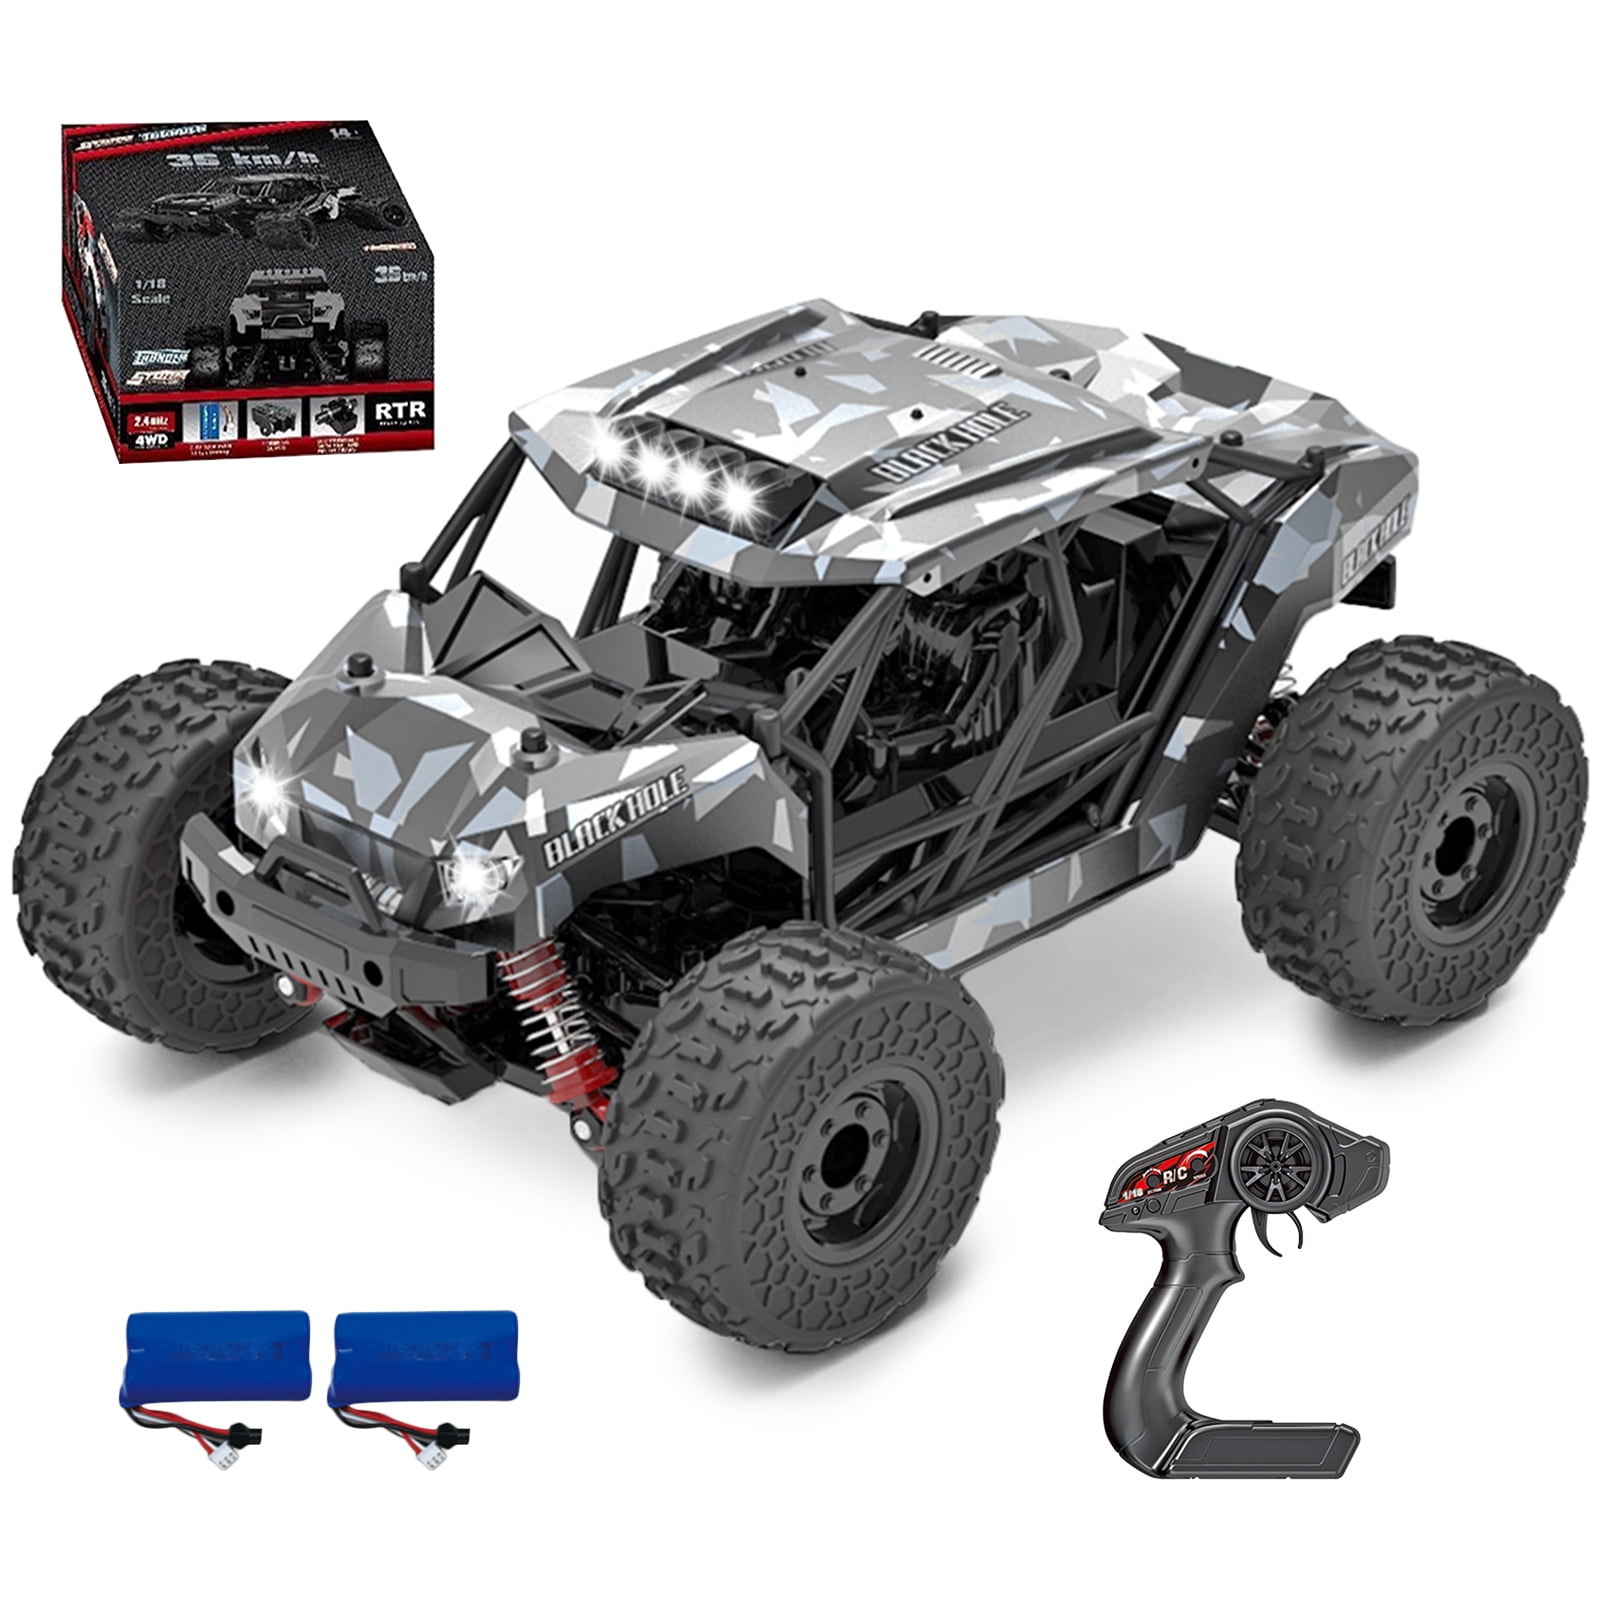 donor De layout Atlantische Oceaan Mojoyce Remote Control Car 1:18 RC Cars 36+km/h 4WD Off Road Monster Truck  with 2Battery Gift for Kids and Adults Black - Walmart.com